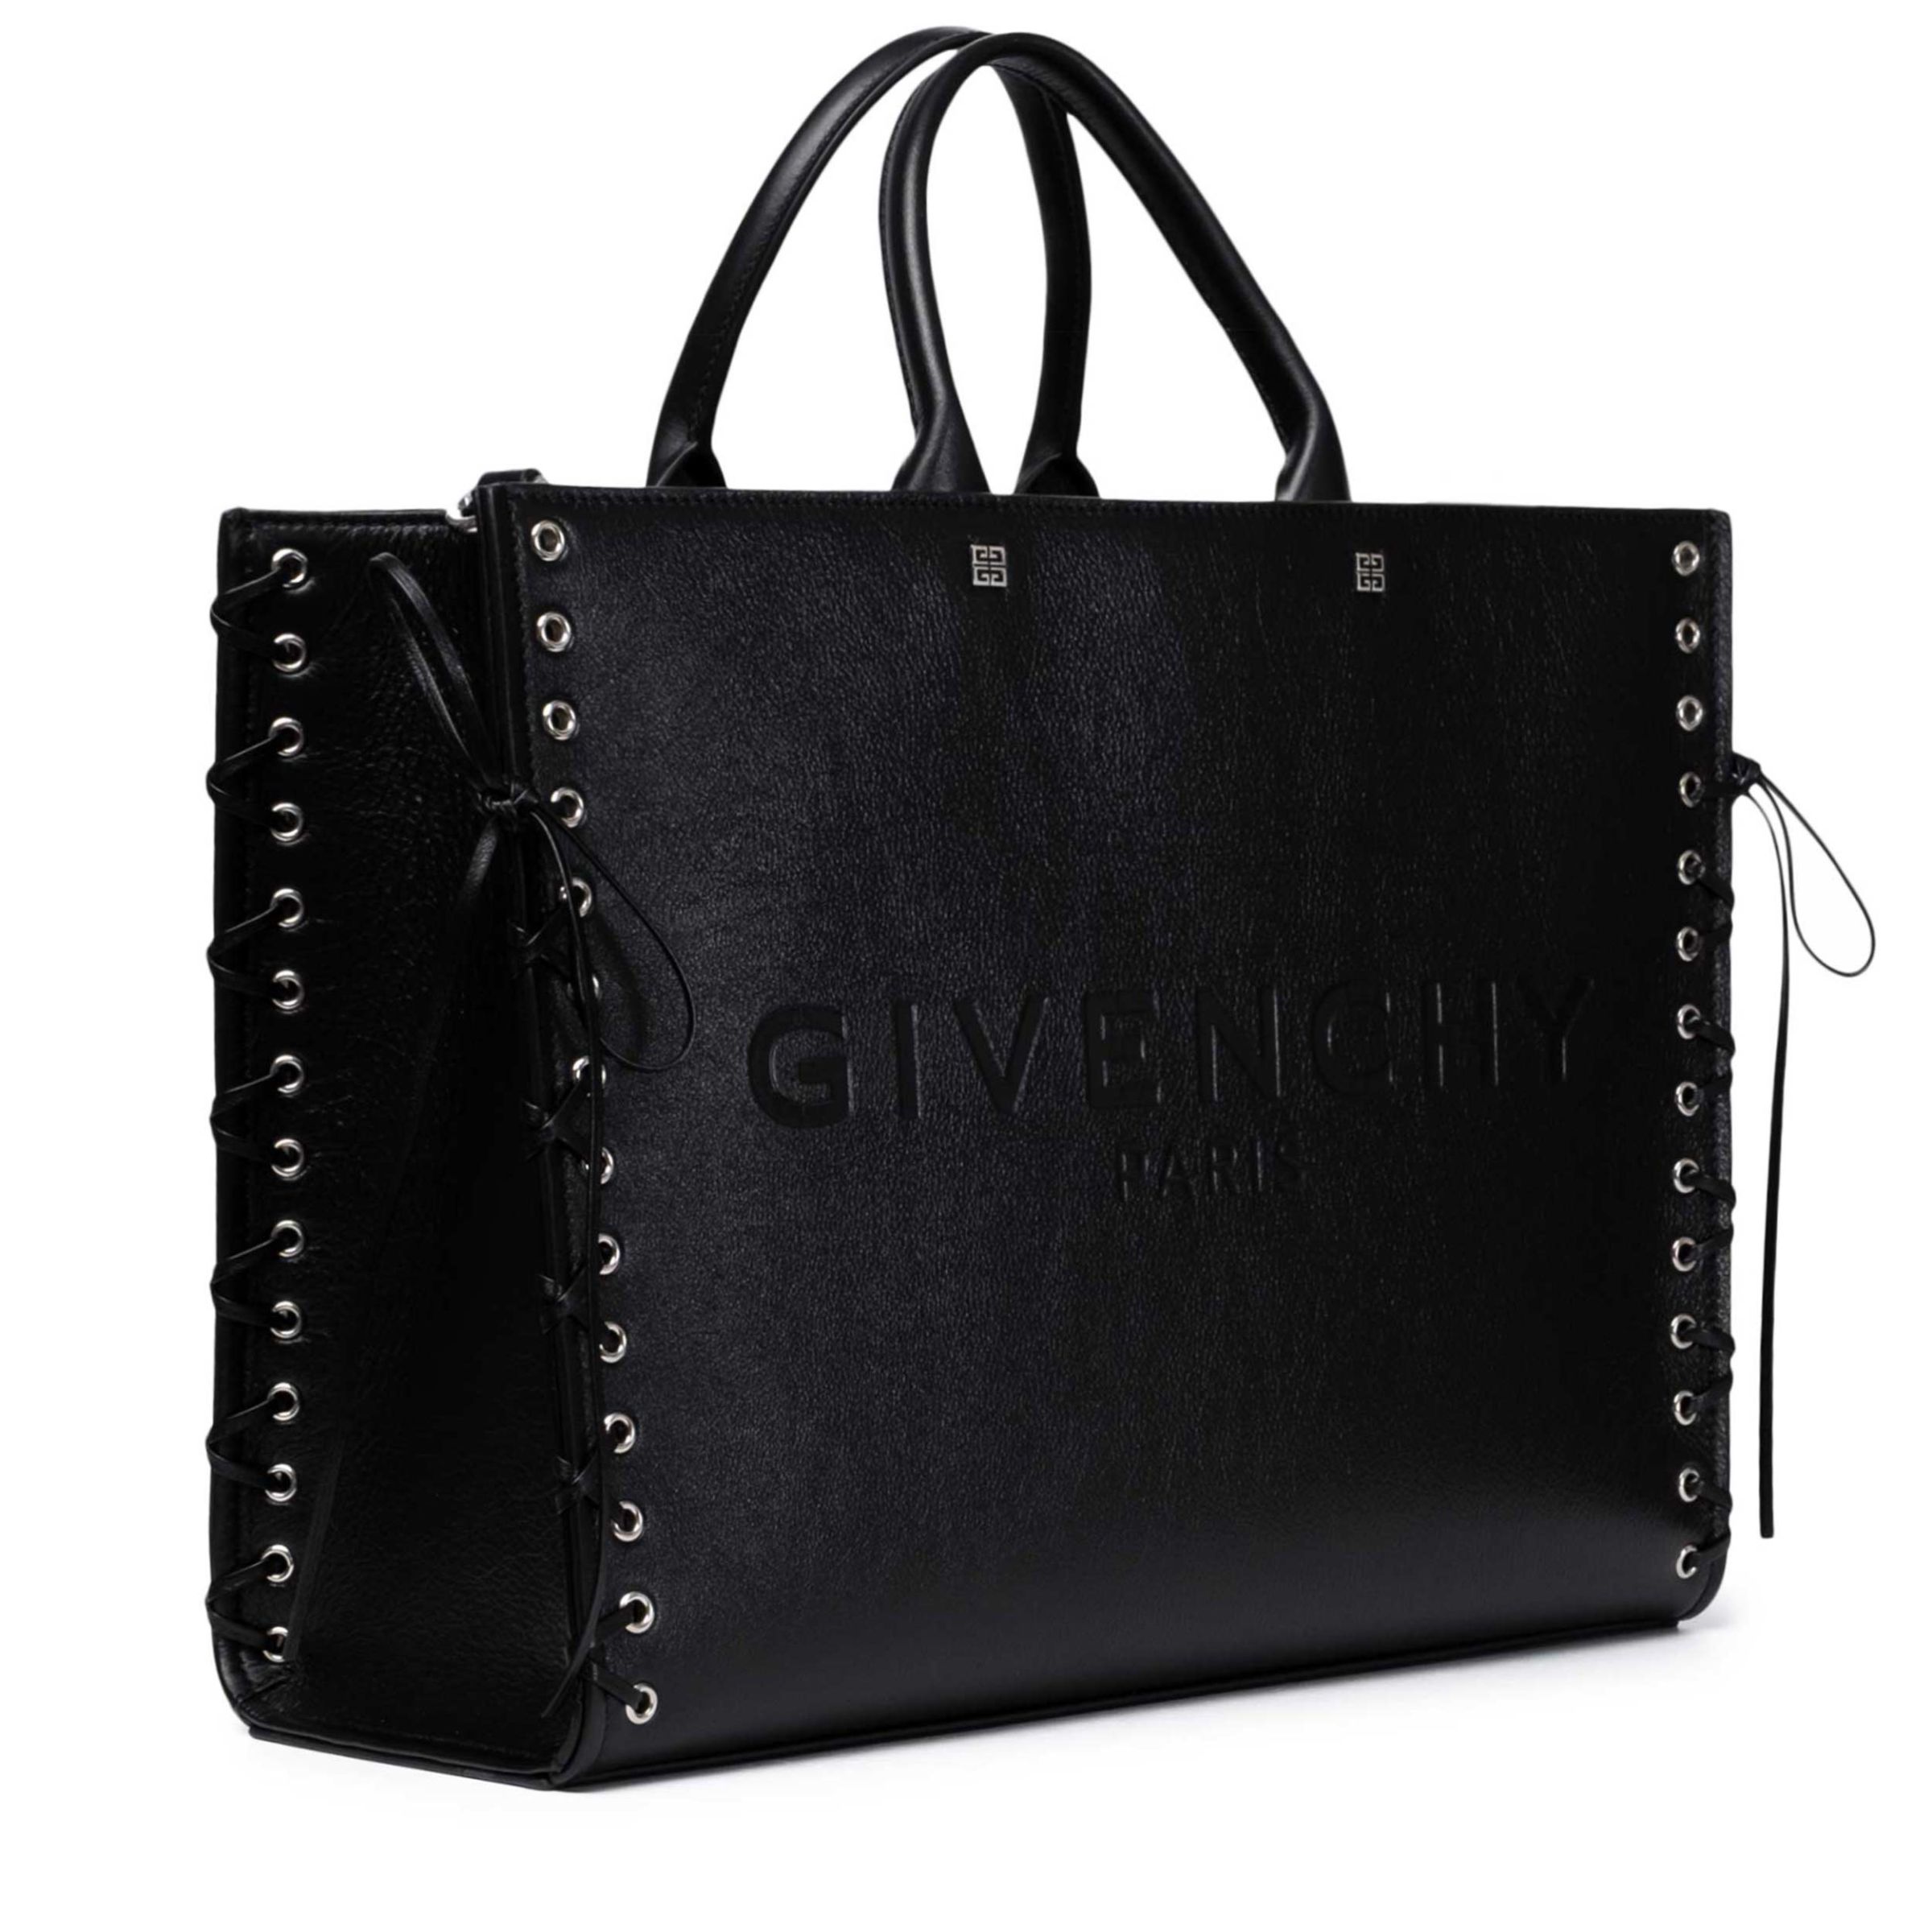 Сумка Givenchy G-Tote чорна